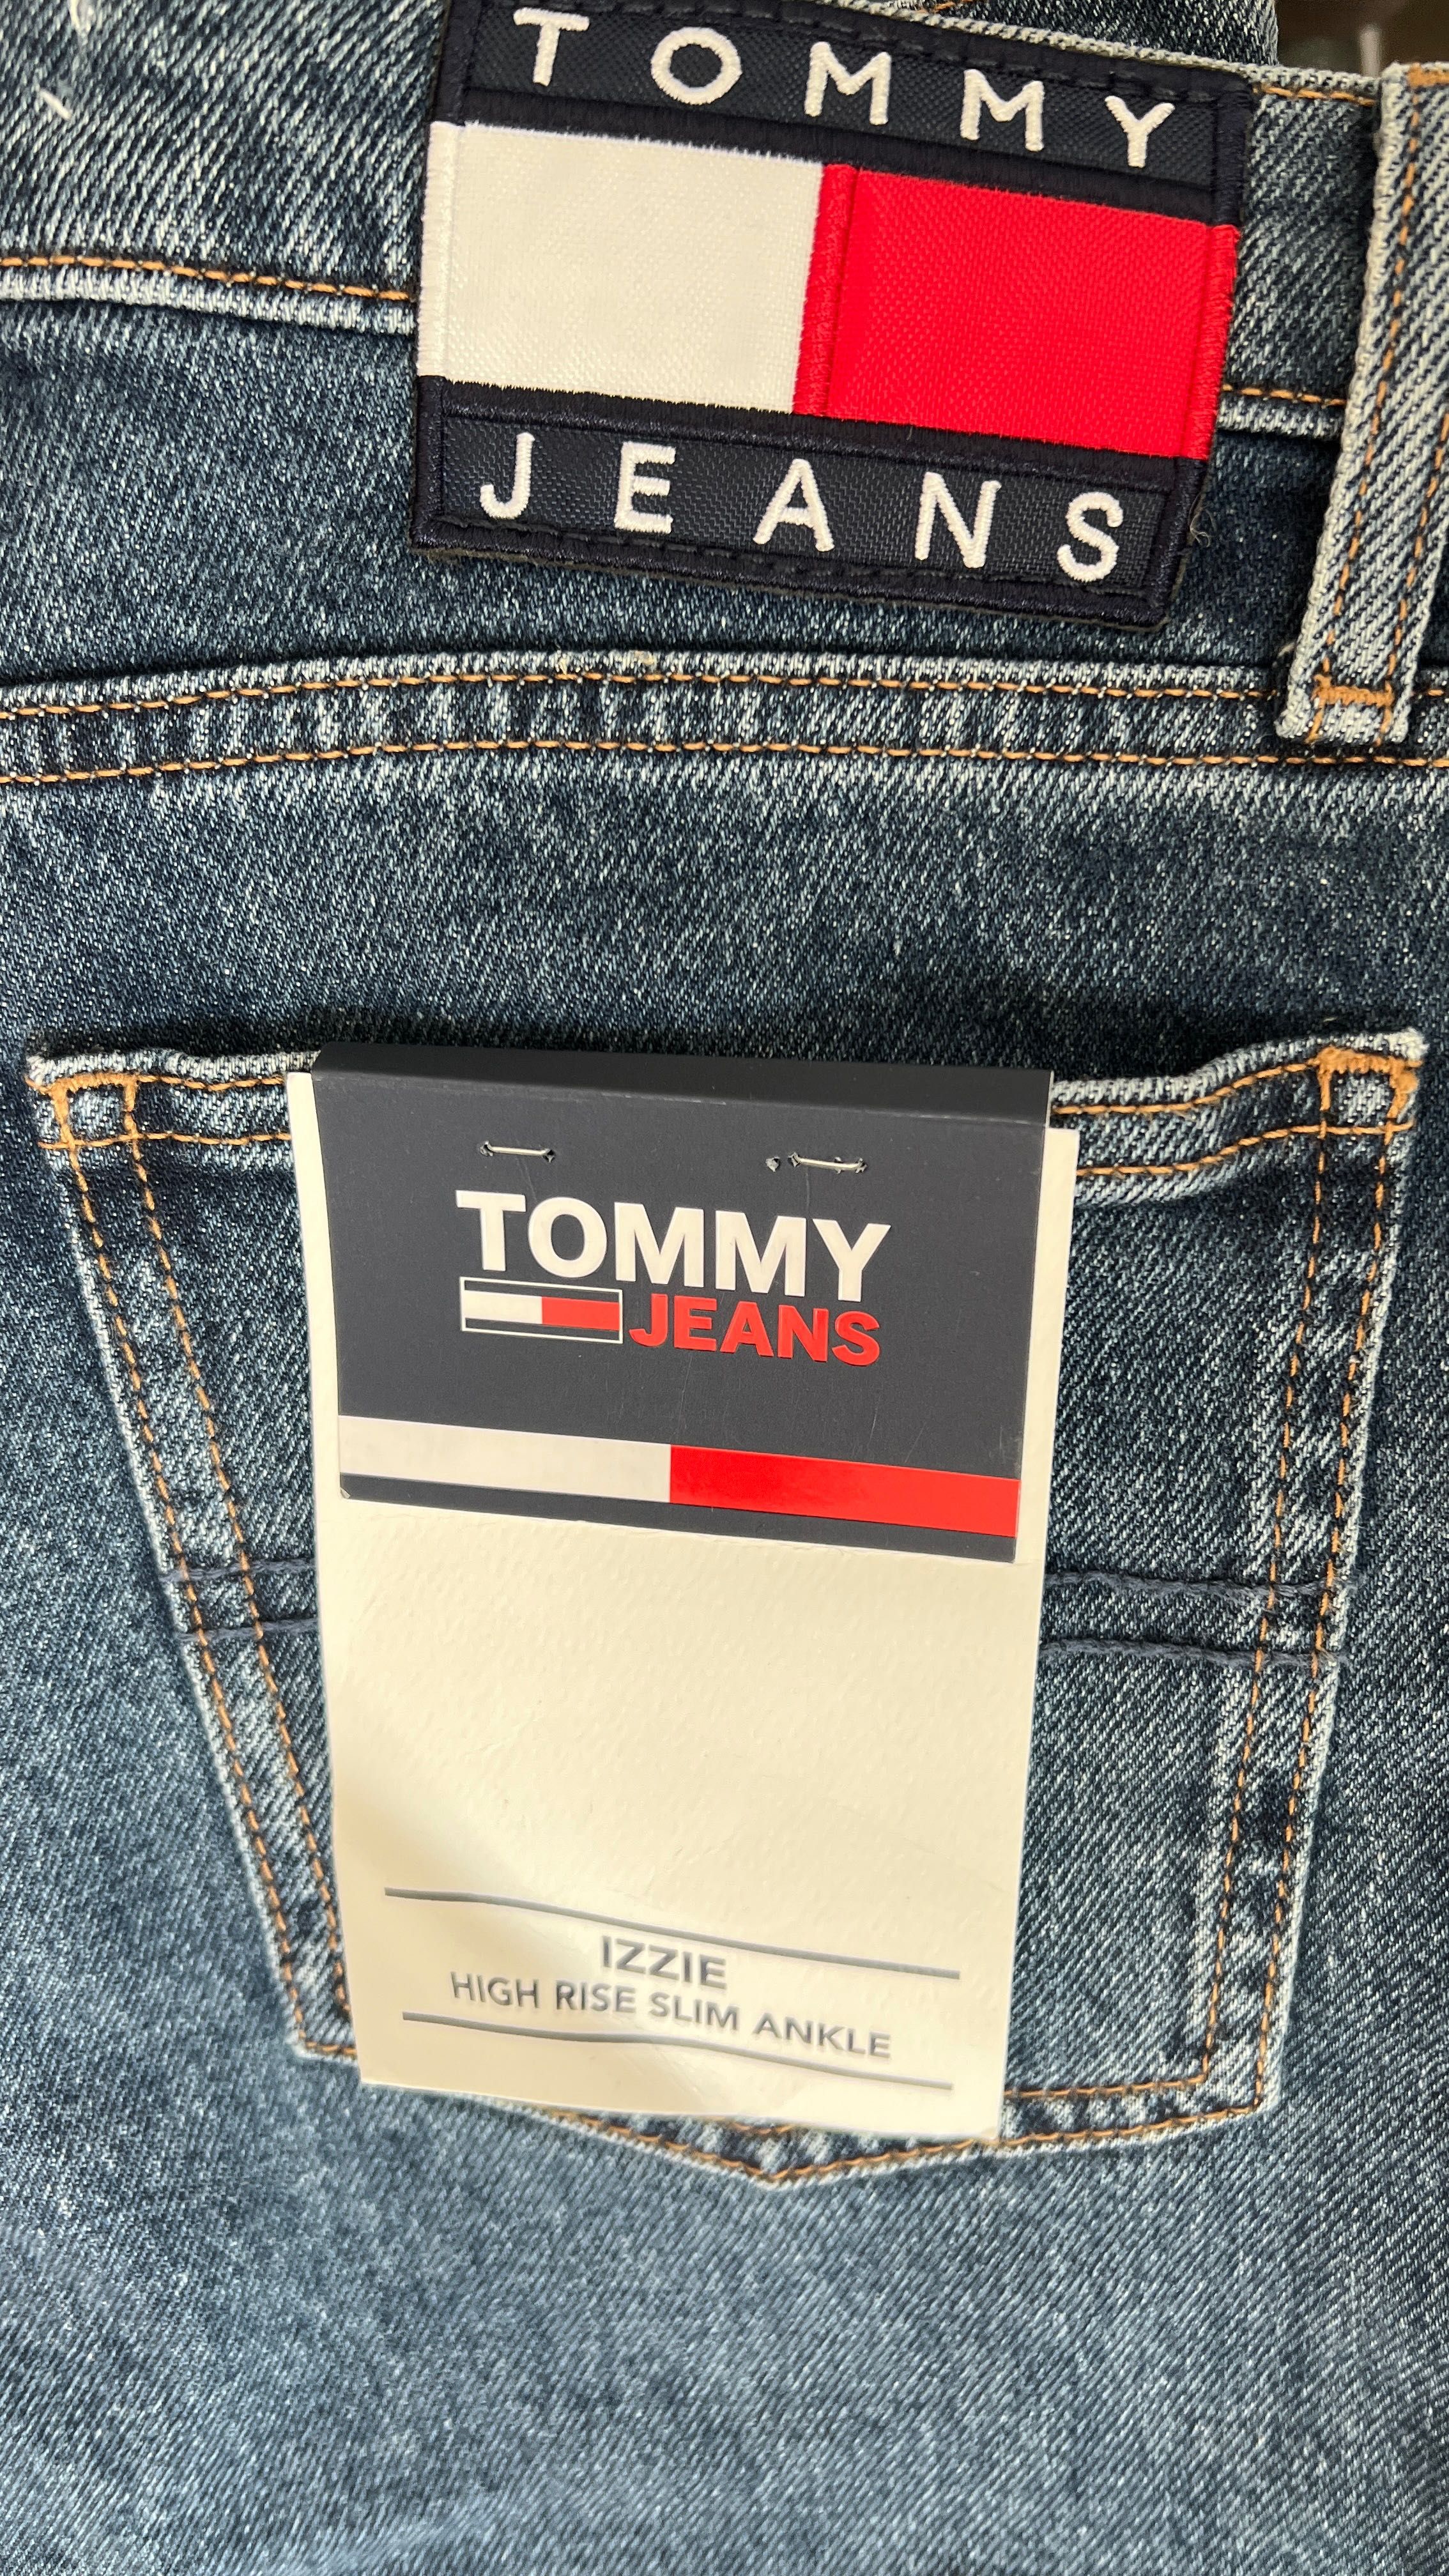 Tommy Jeans,model Izzie